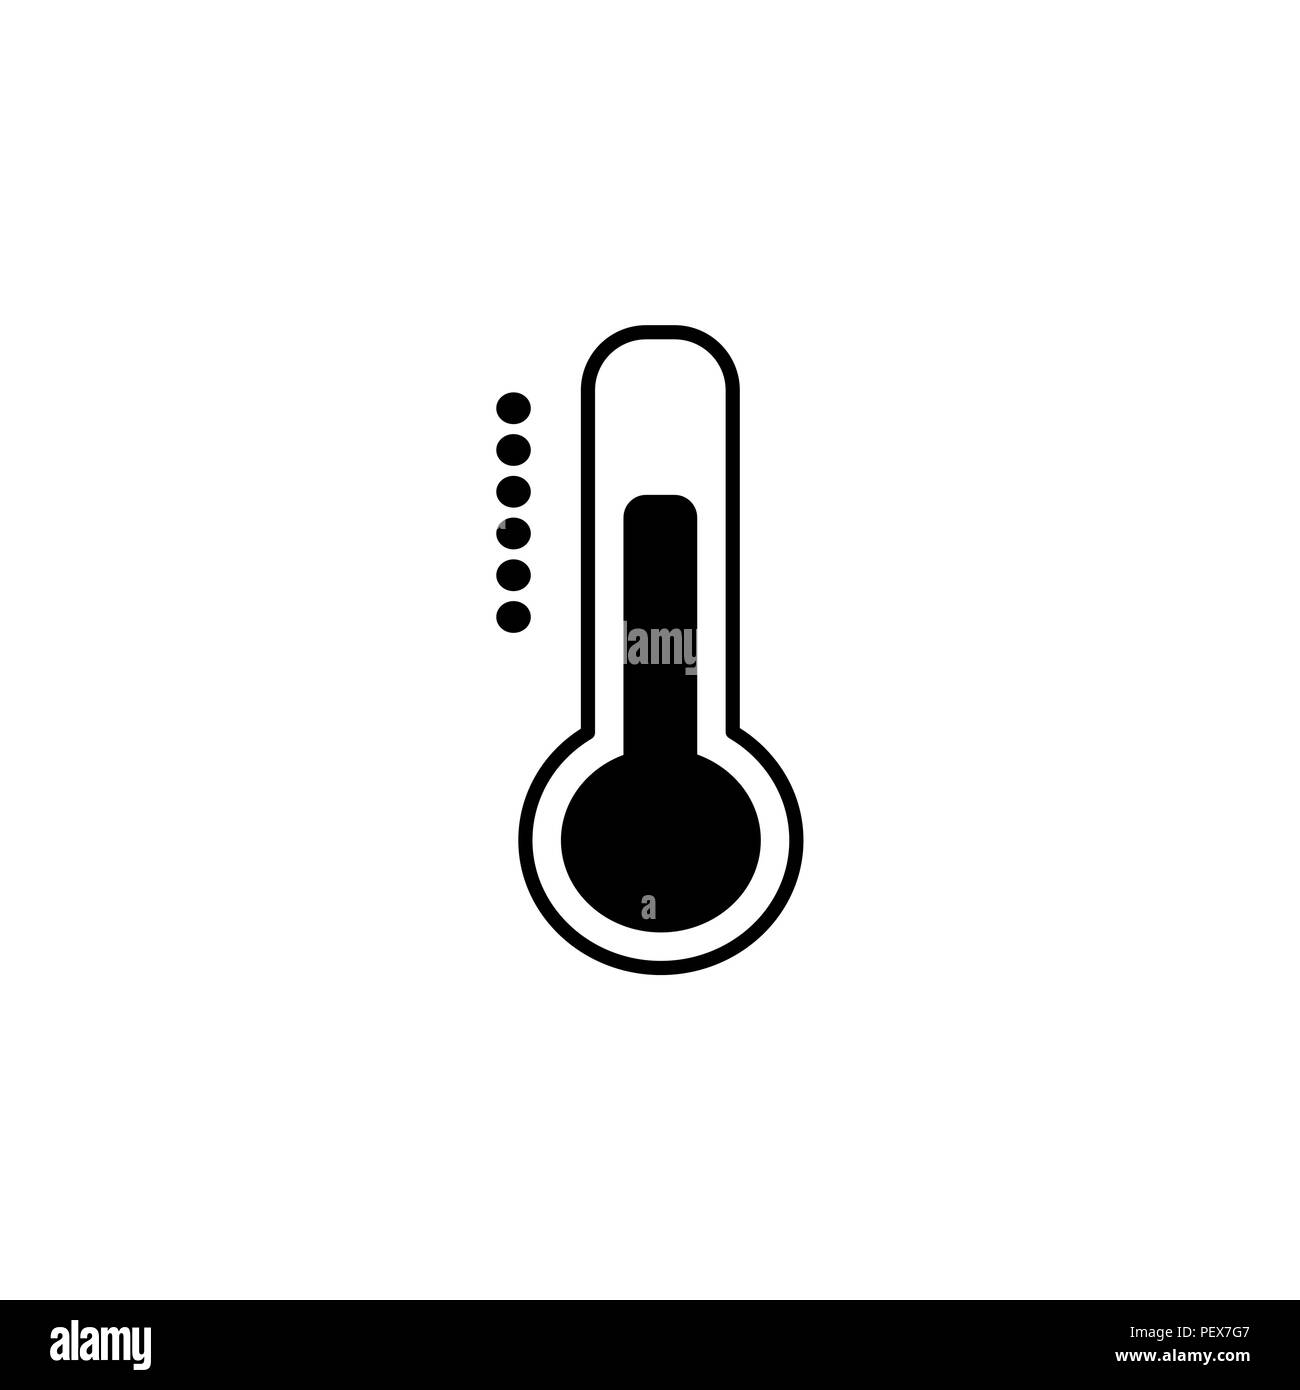 Thermometer icon , vector illustration black on white background Stock Vector